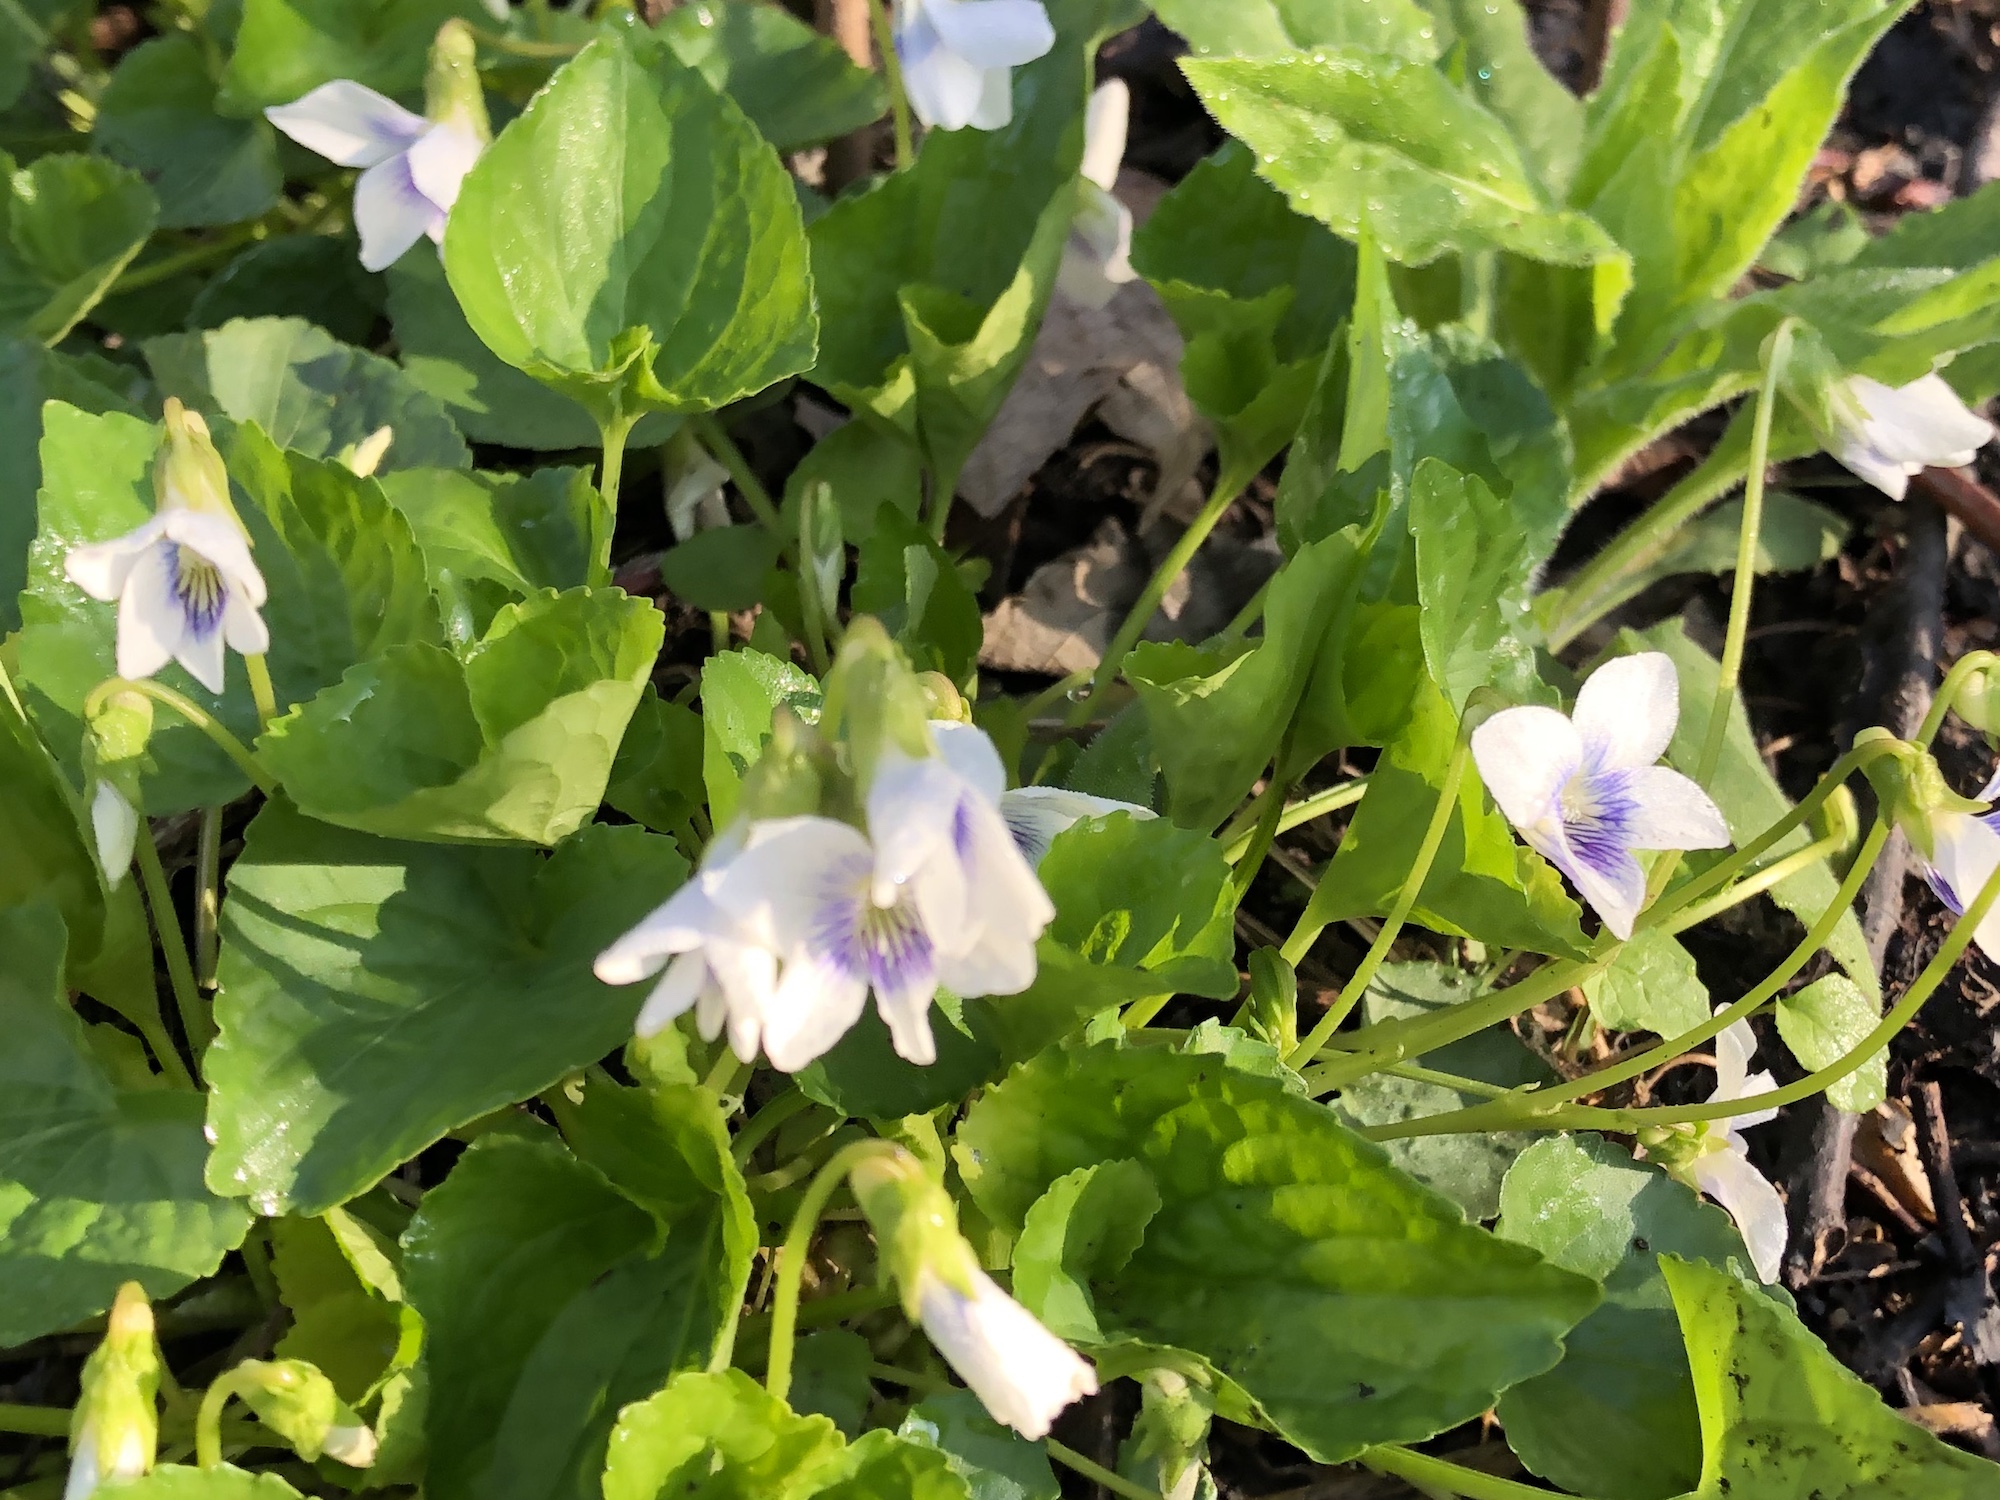 Wood Violets near Council Ring, the Oak Savanna and the Duck Pond on May 3 2019.